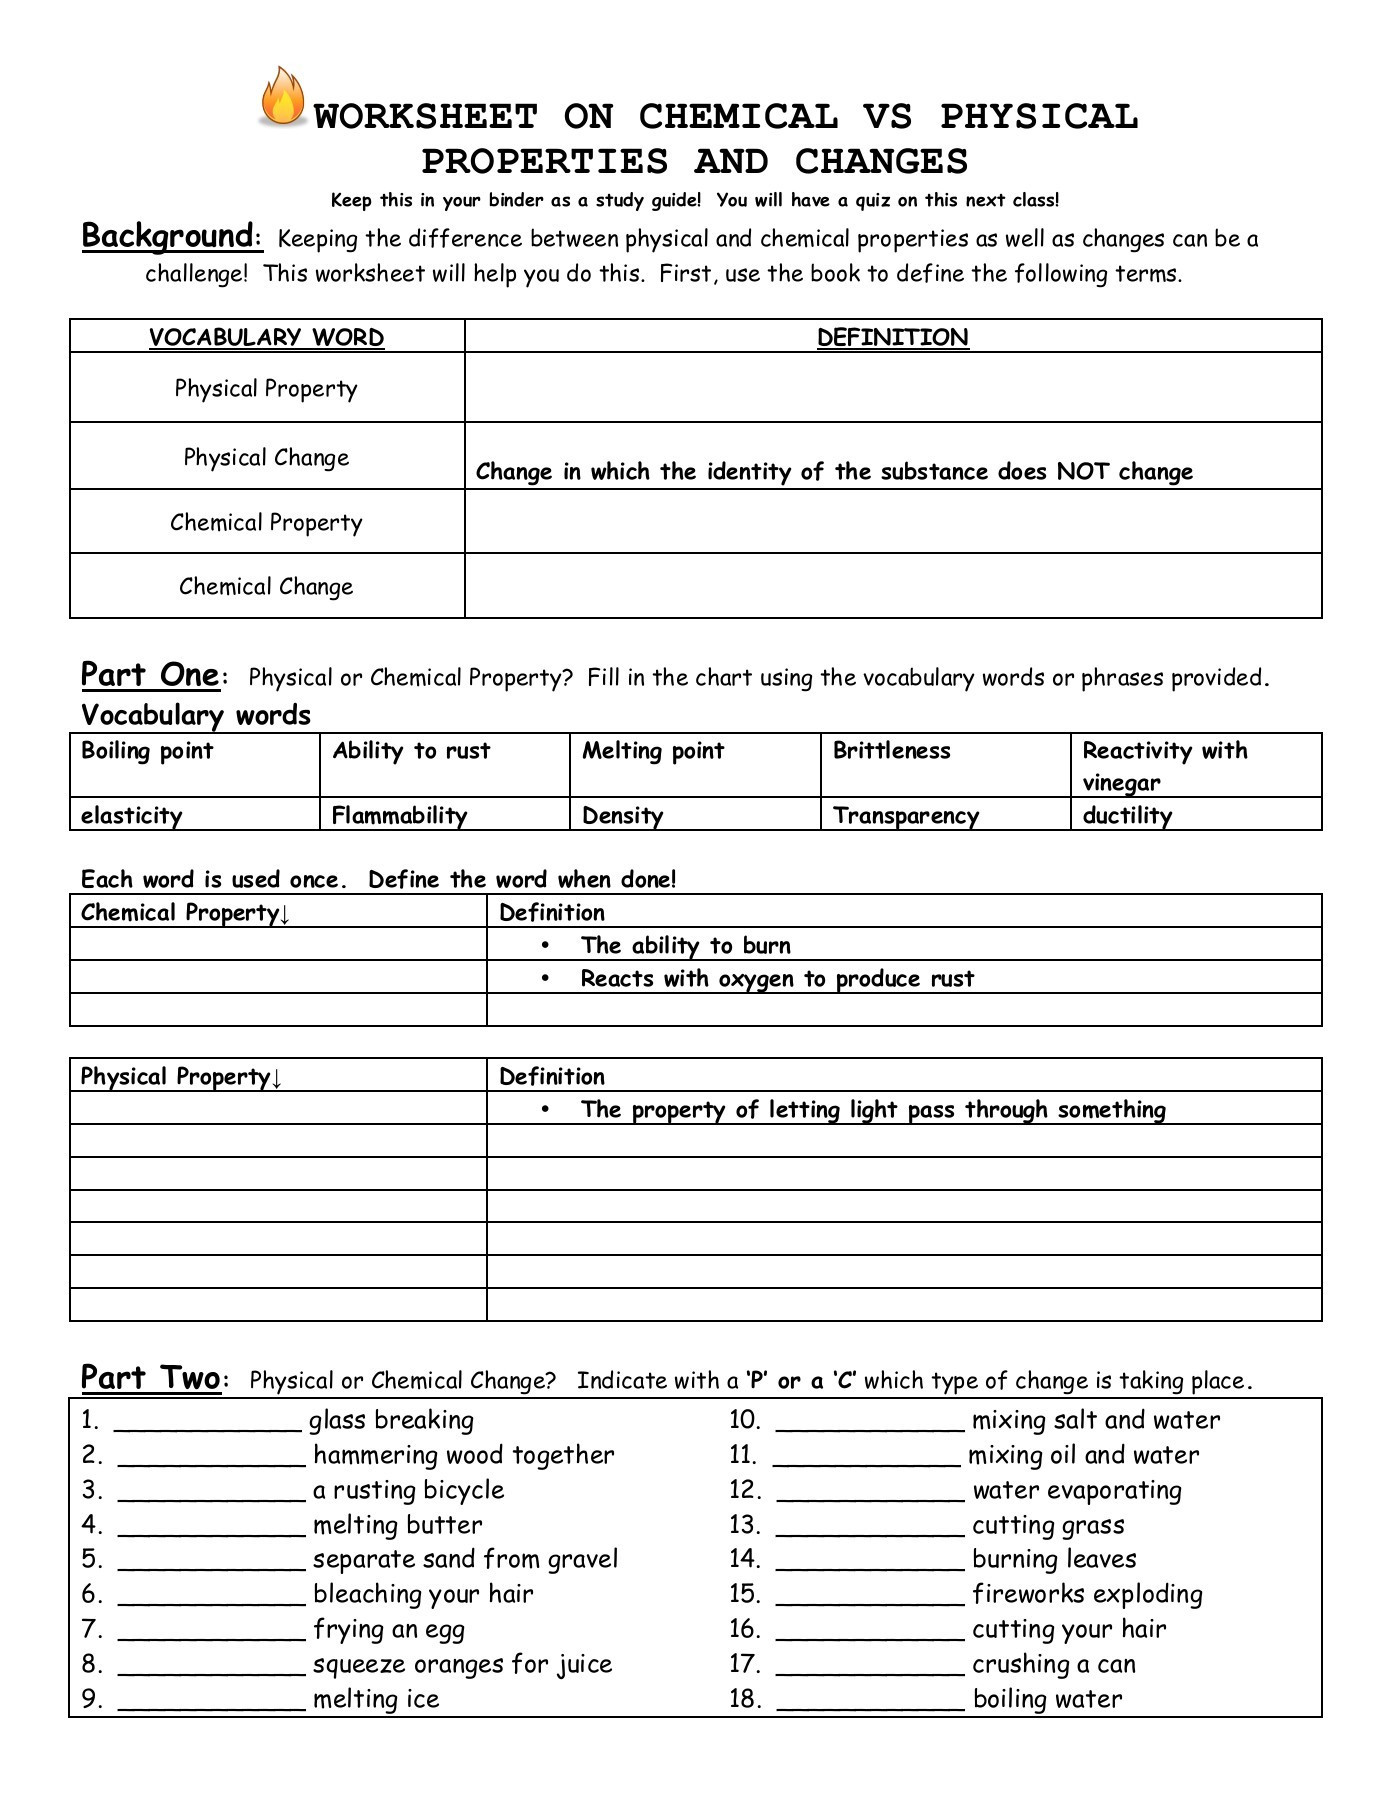 Physical and Chemical Change Worksheet Worksheet On Chemical Vs Physical Properties and Changes